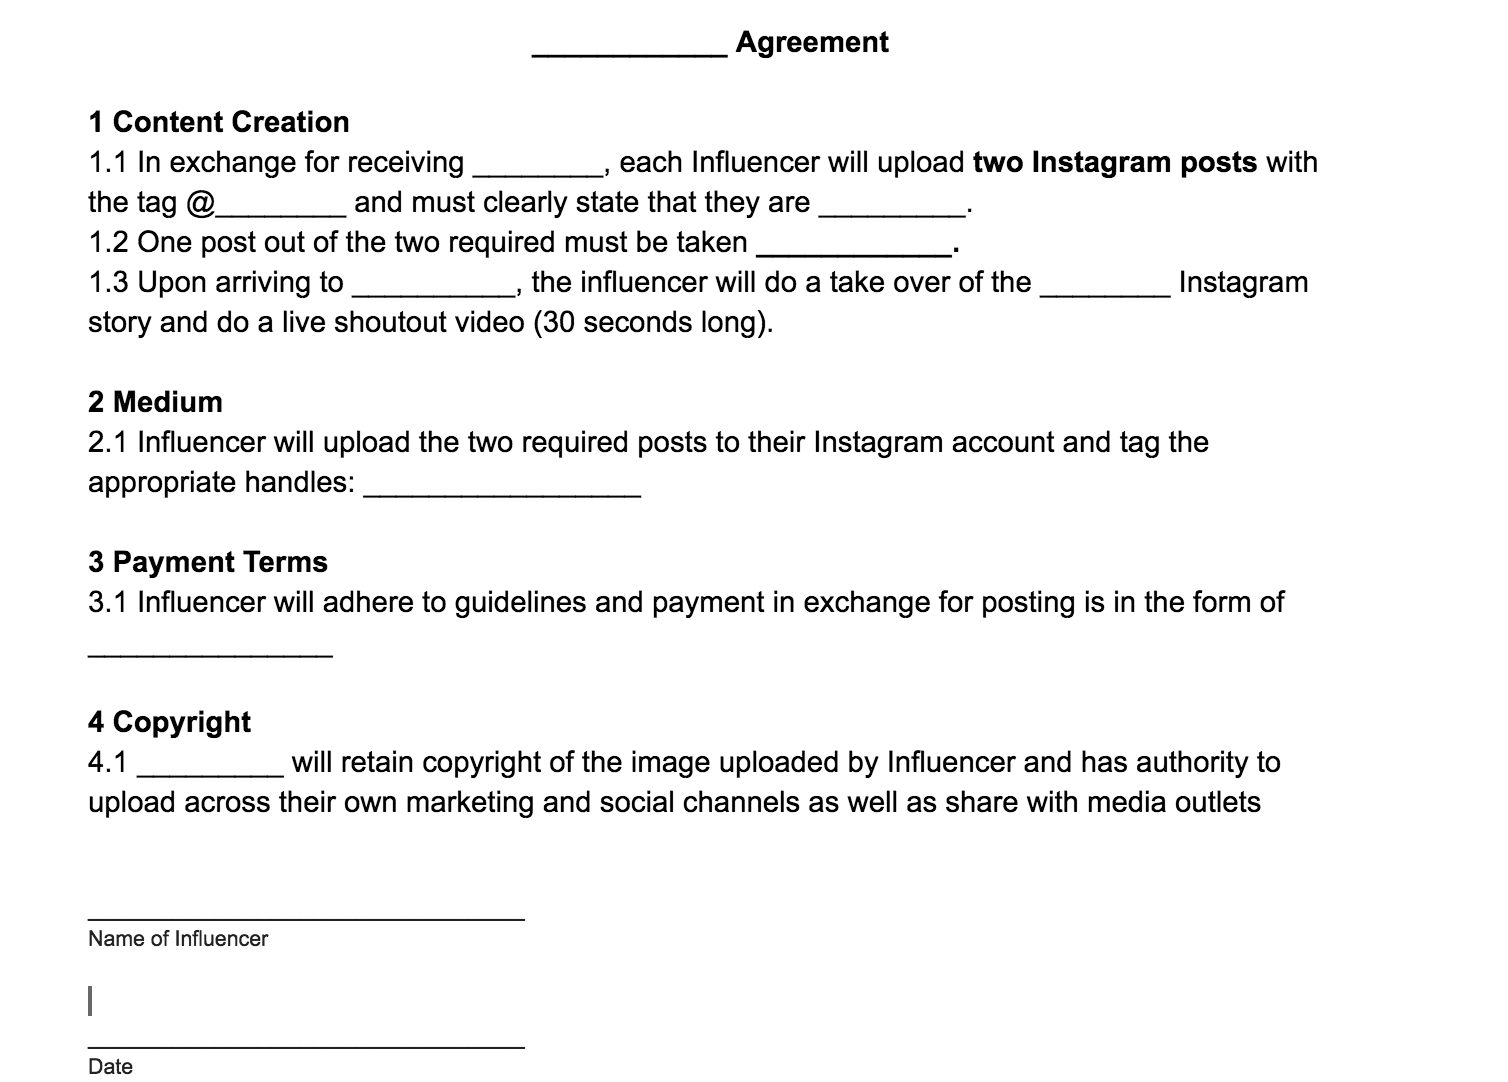 INFLUENCER/BLOGGER AGREEMENT TEMPLATE (FREE DOWNLOAD)